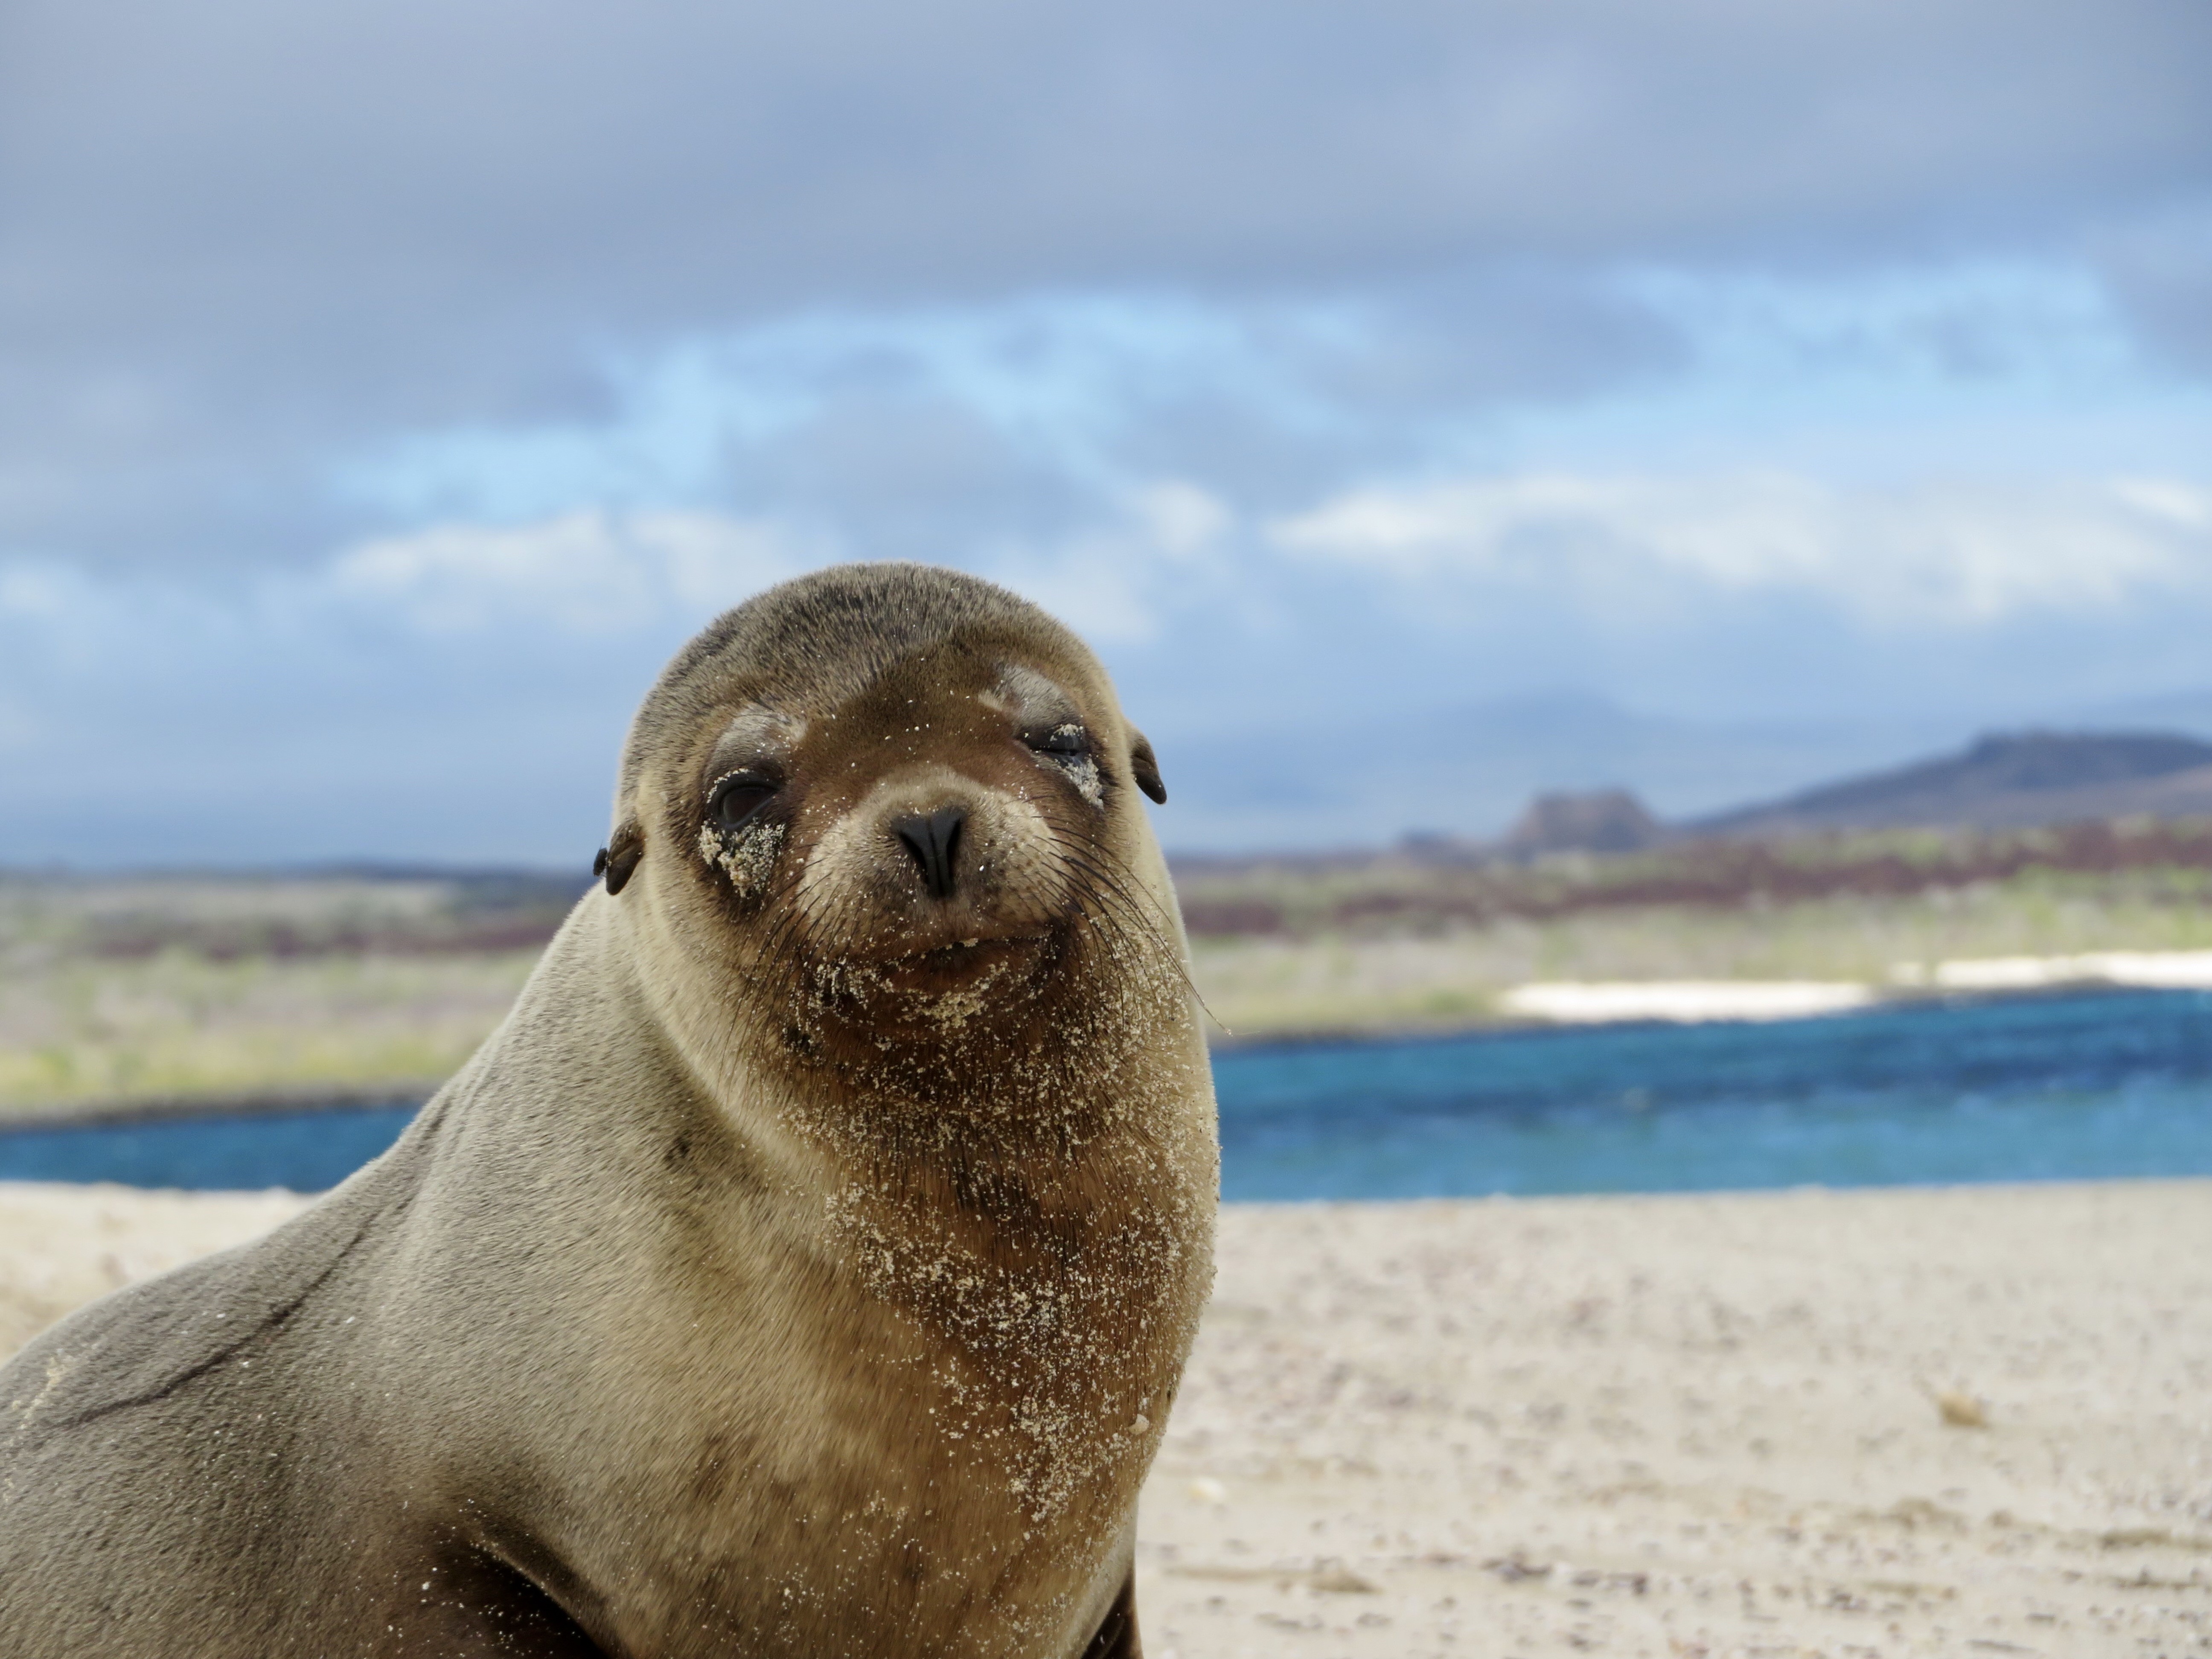 A portrait of a seal at the beach